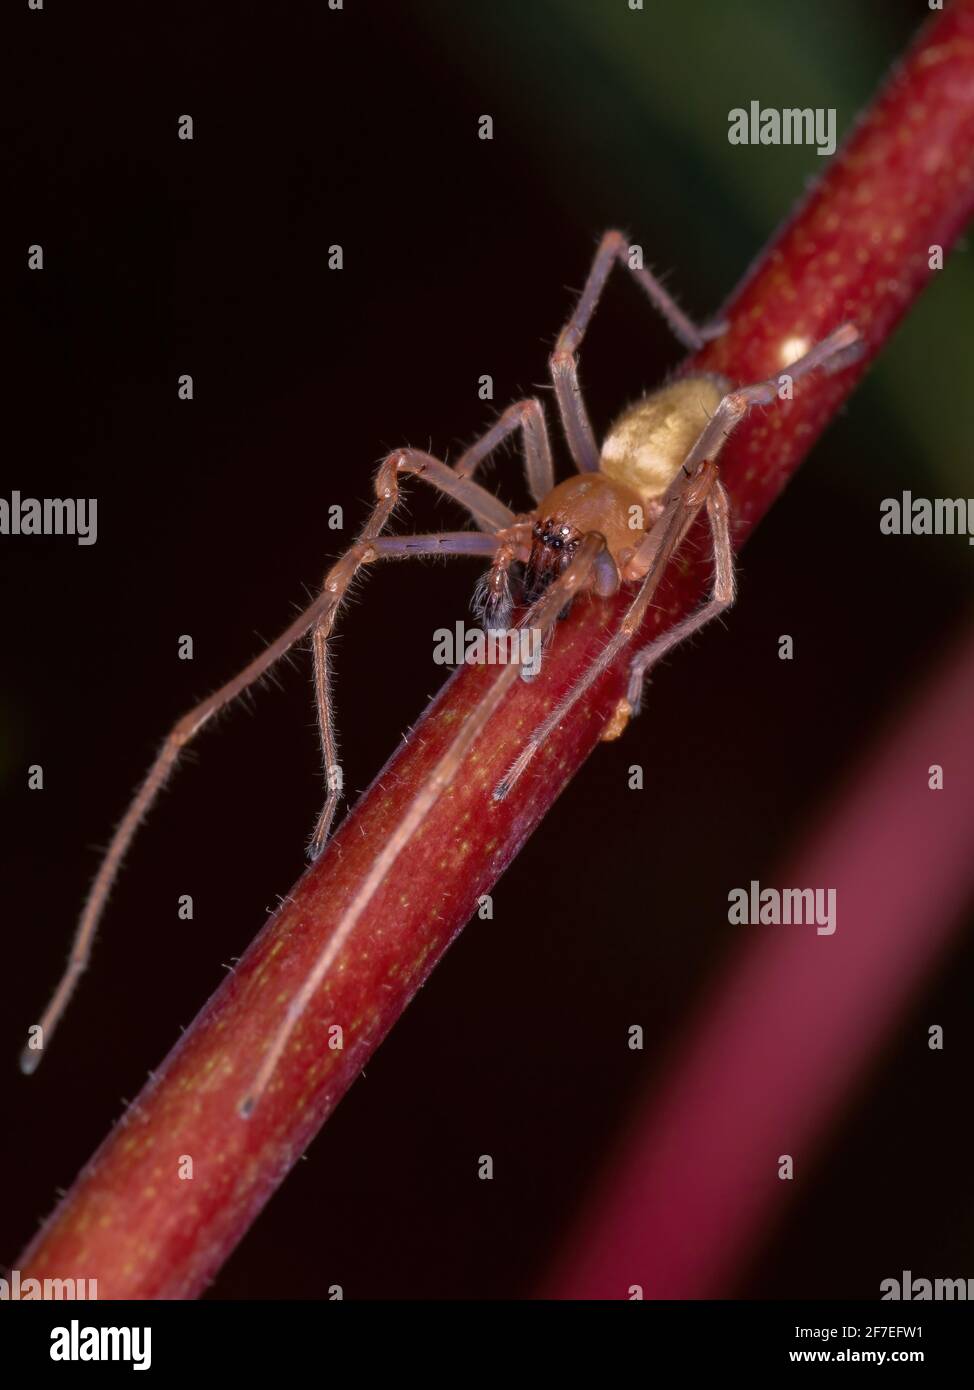 Agrarian Sac Spider of the species Cheiracanthium inclusum Stock Photo